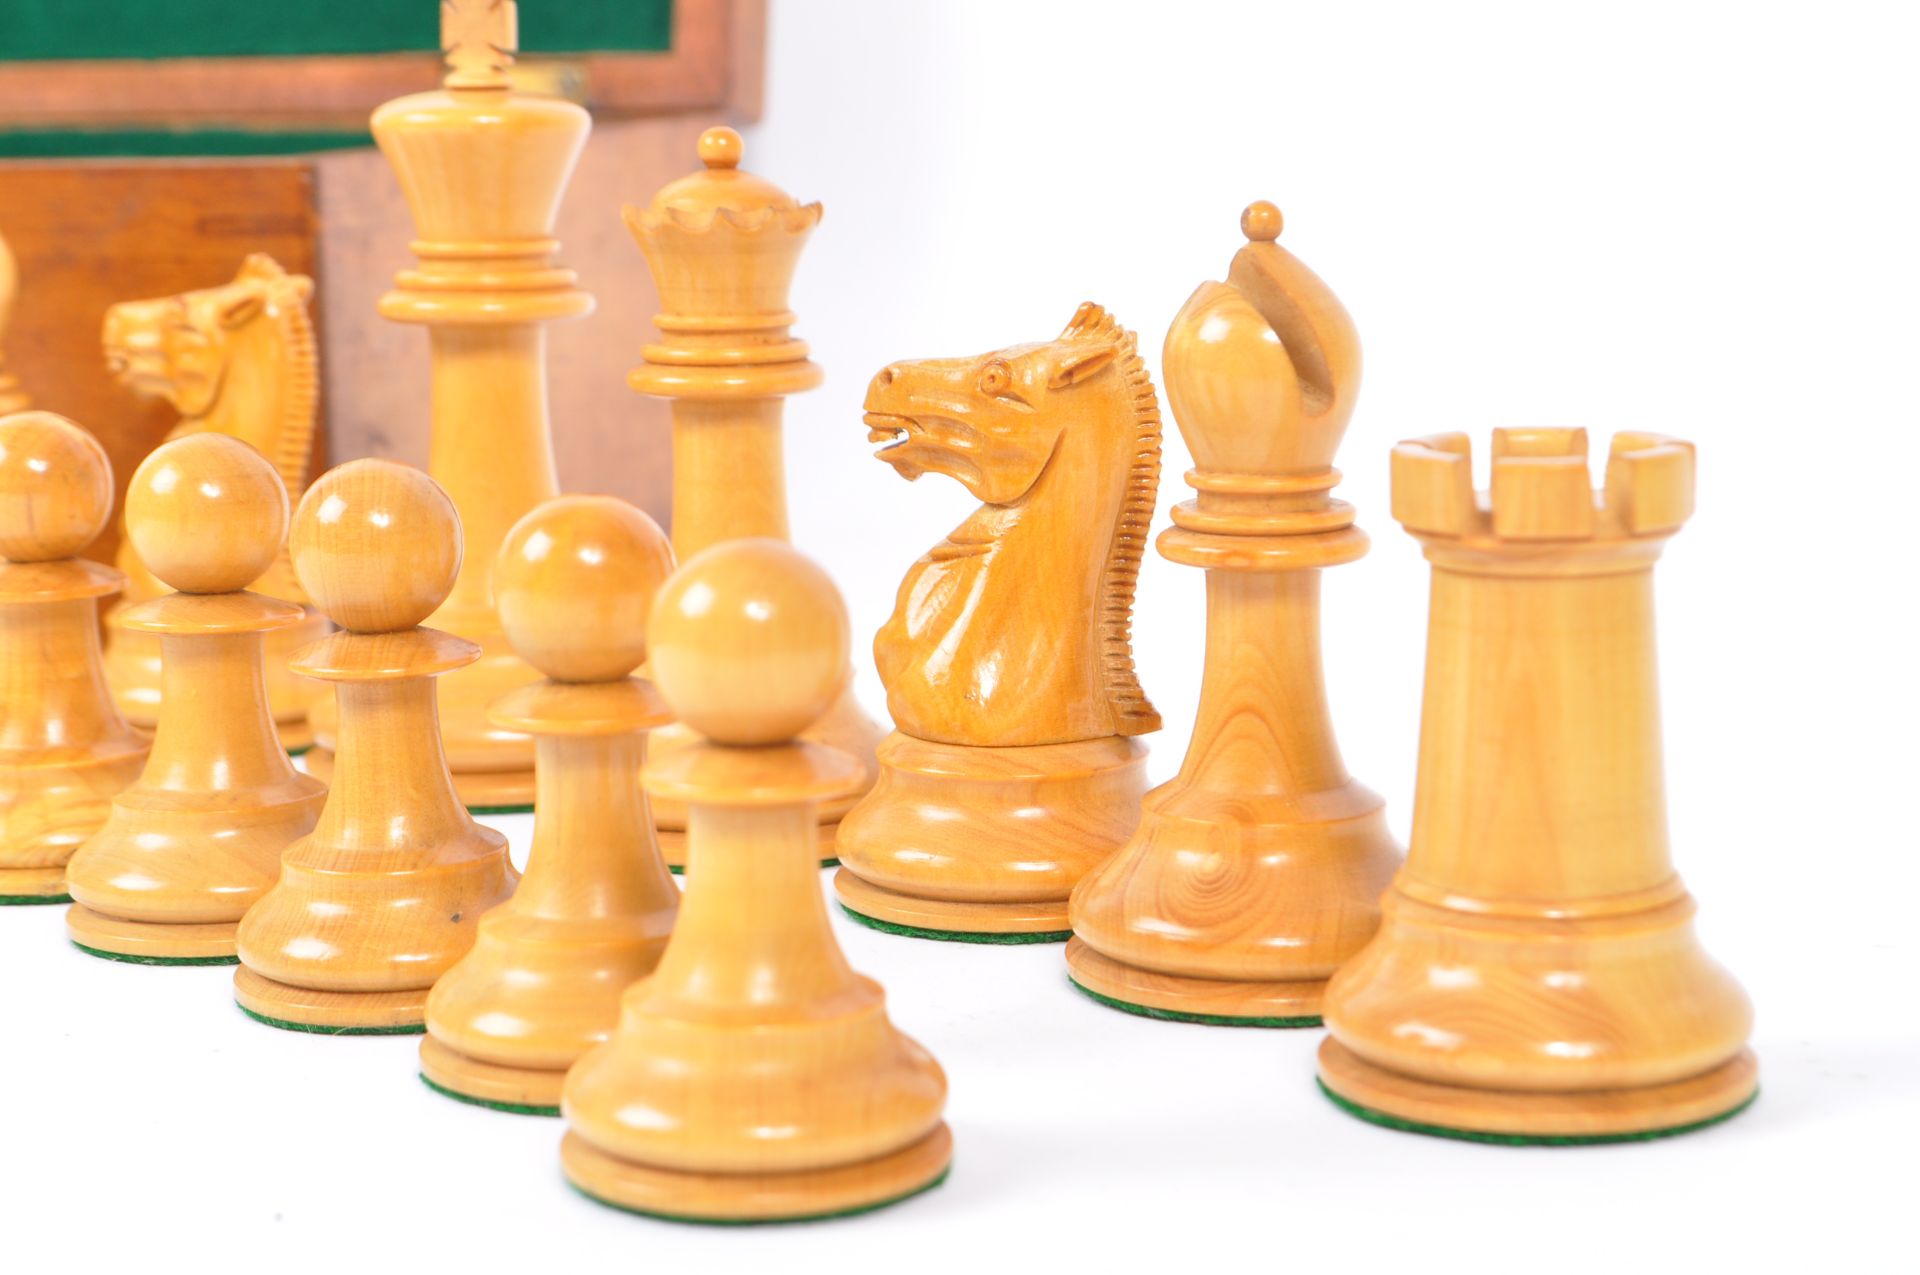 J. JAQUES & SON - EARLY 20TH CENTURY CHESS SET - Image 8 of 10